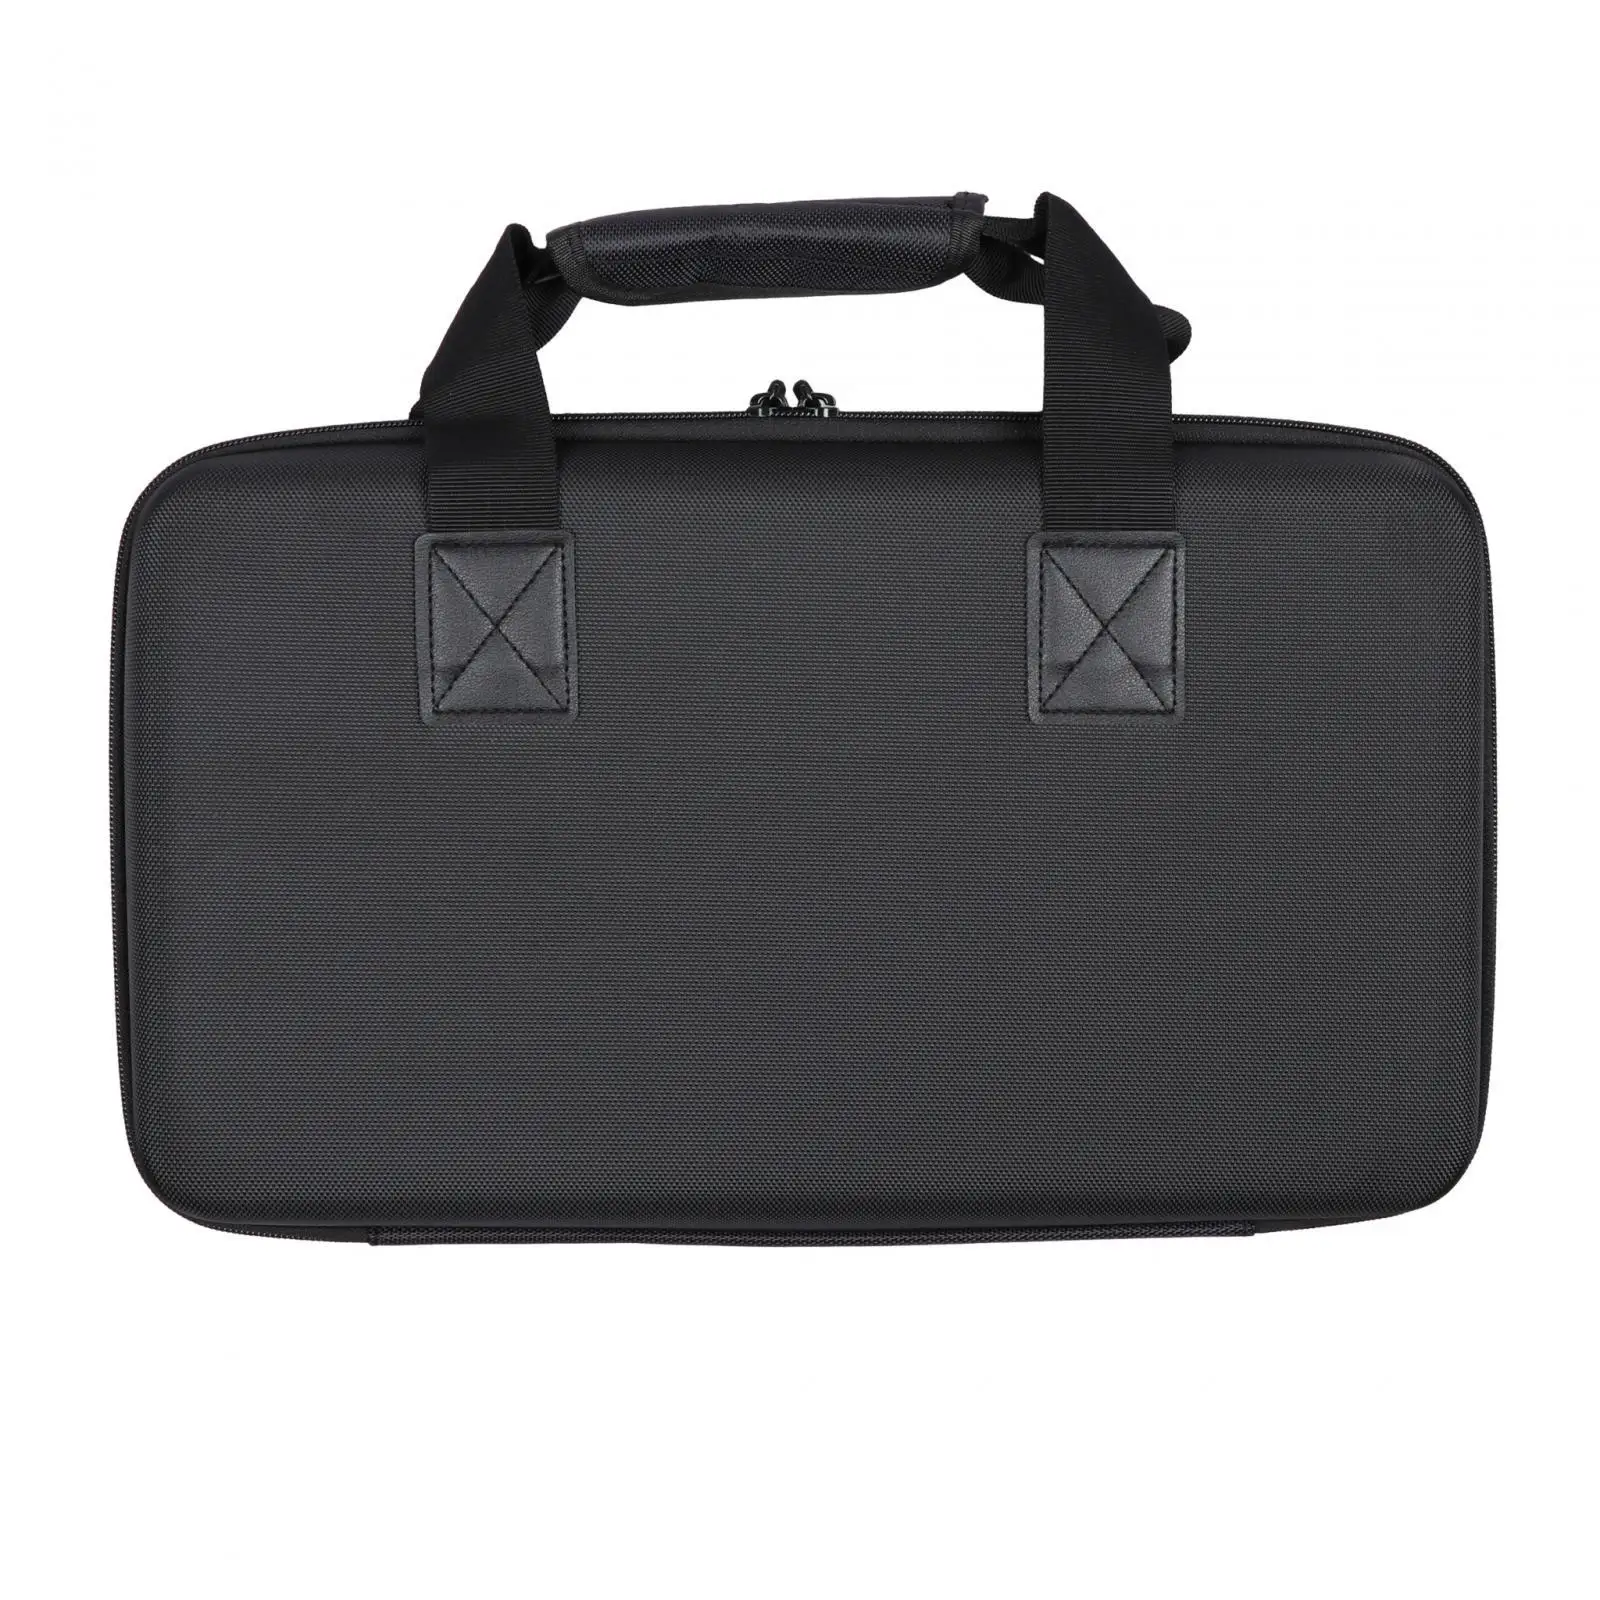 EVA for Ddj 400 Smooth Zippers DJ Gear Case DJ Equipment Case DJ Controllers Carry Case Carrying Bag for Travel Performance